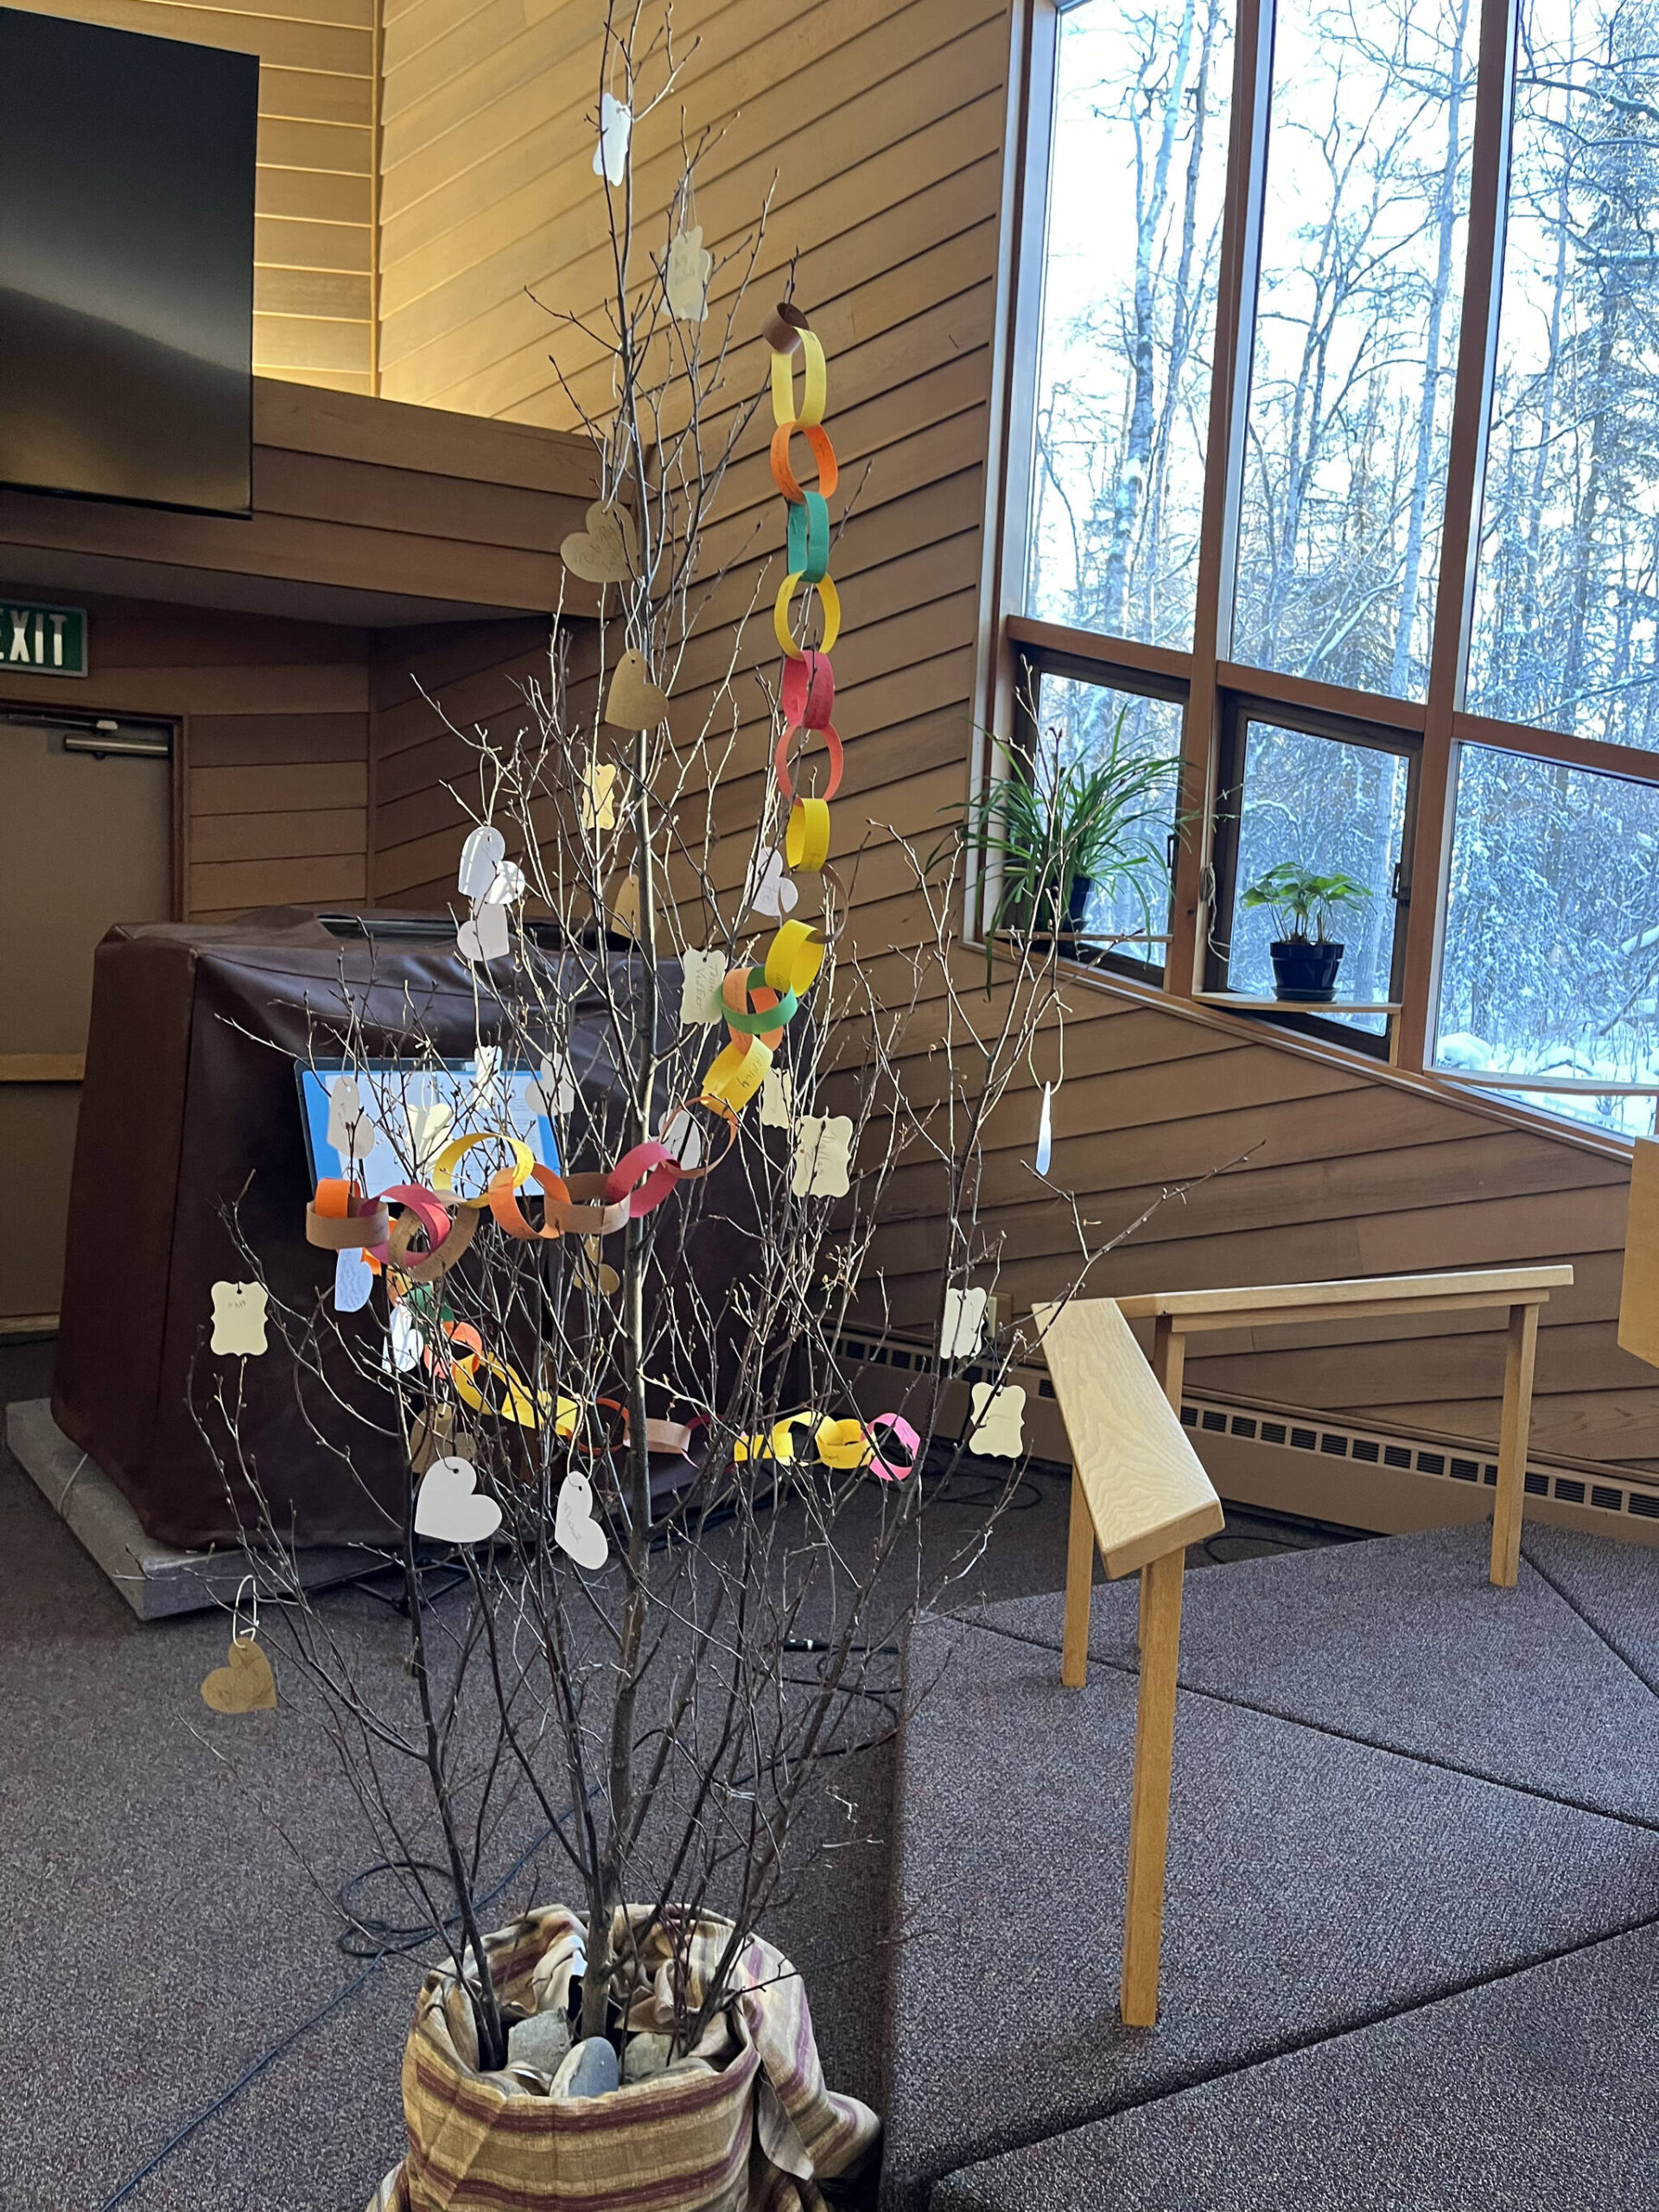 Paper chains made of gratitude strips adorn a Christmas tree at Christ Lutheran Church in Soldotna. (Photo courtesy Meredith Harber)